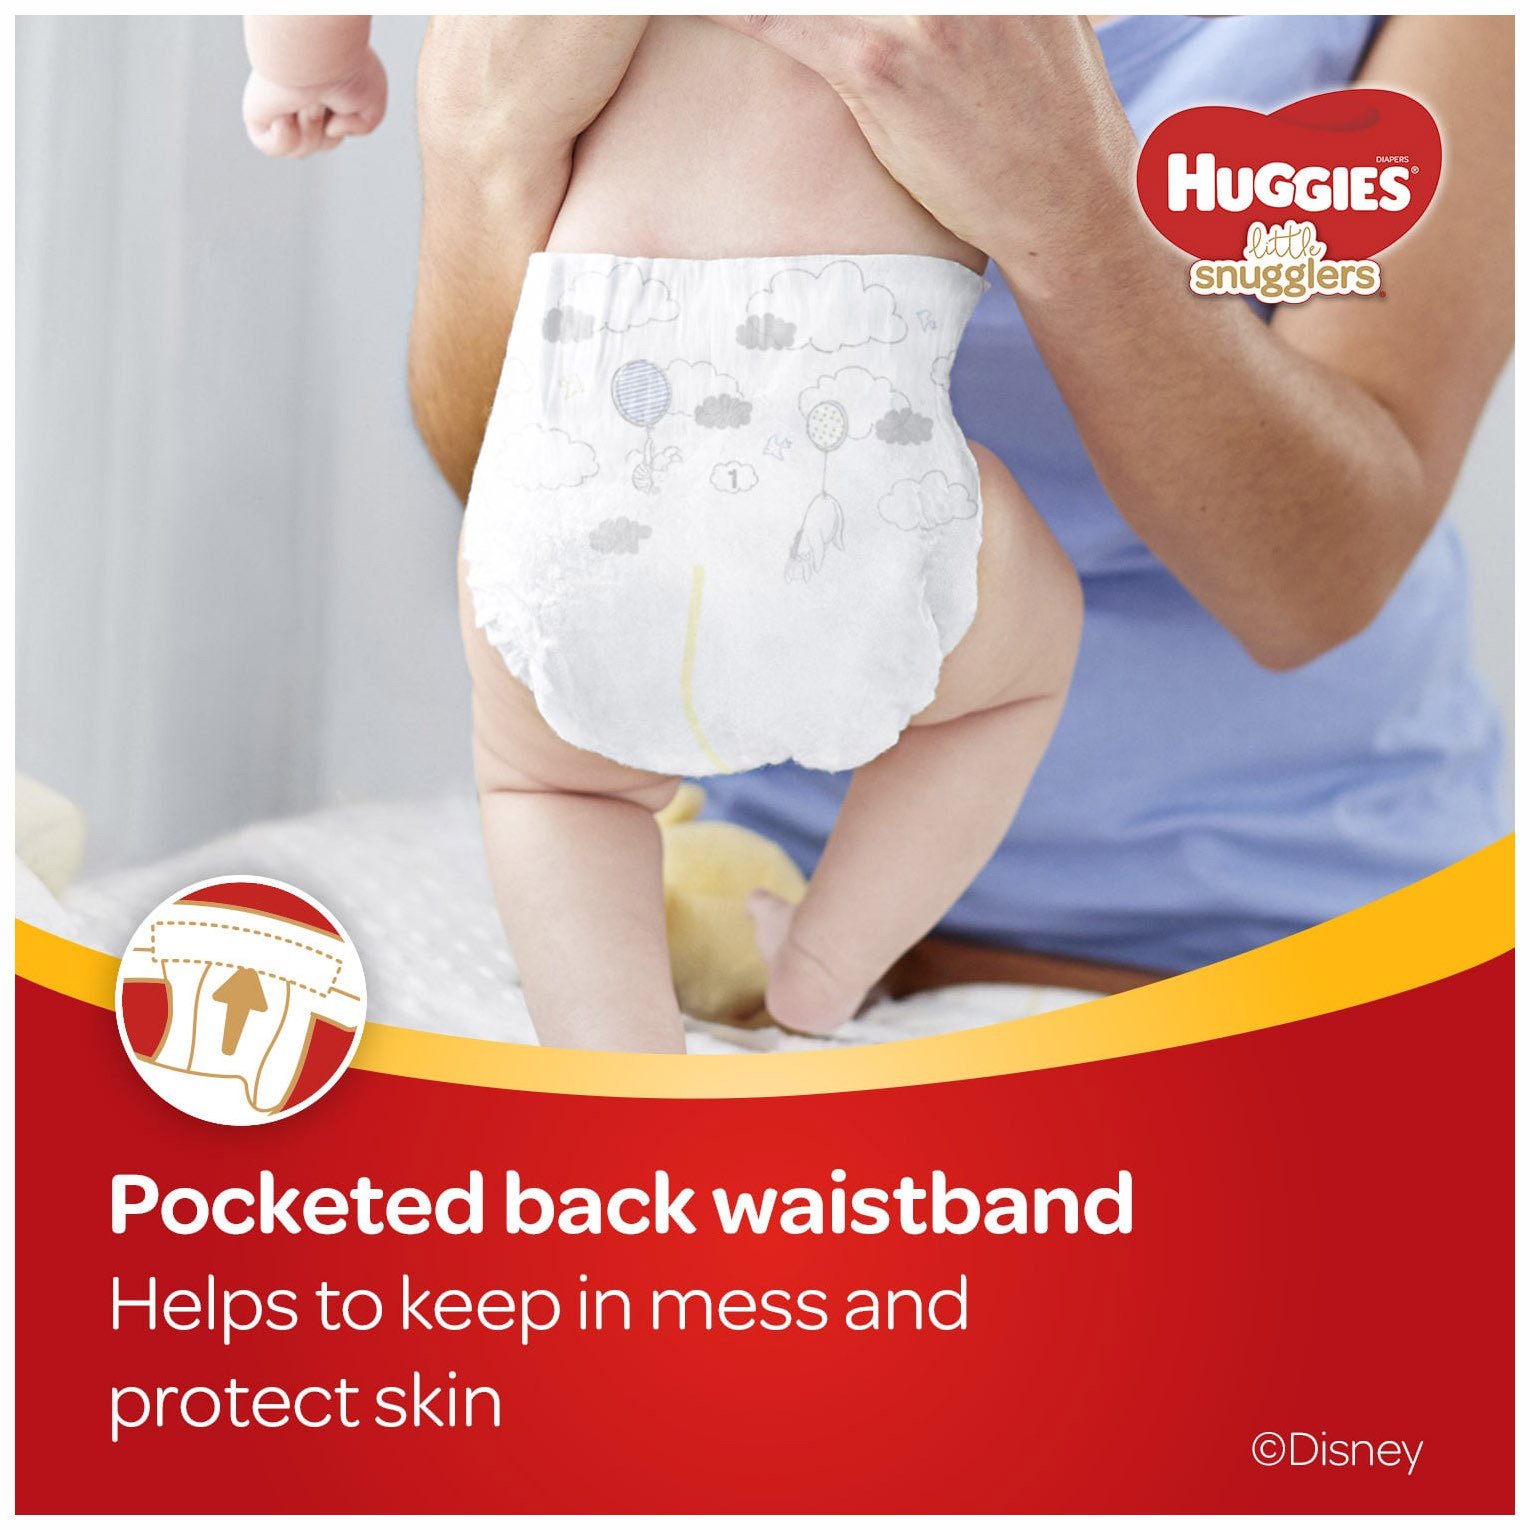 Huggies Newborn Gift Box - Little Snugglers Diapers (Size Newborn, 24 Ct & Size 1, 32 Ct), Natural Care Wipes (96 Ct) & Johnson's Baby Shampoo & Lotion - image 5 of 13